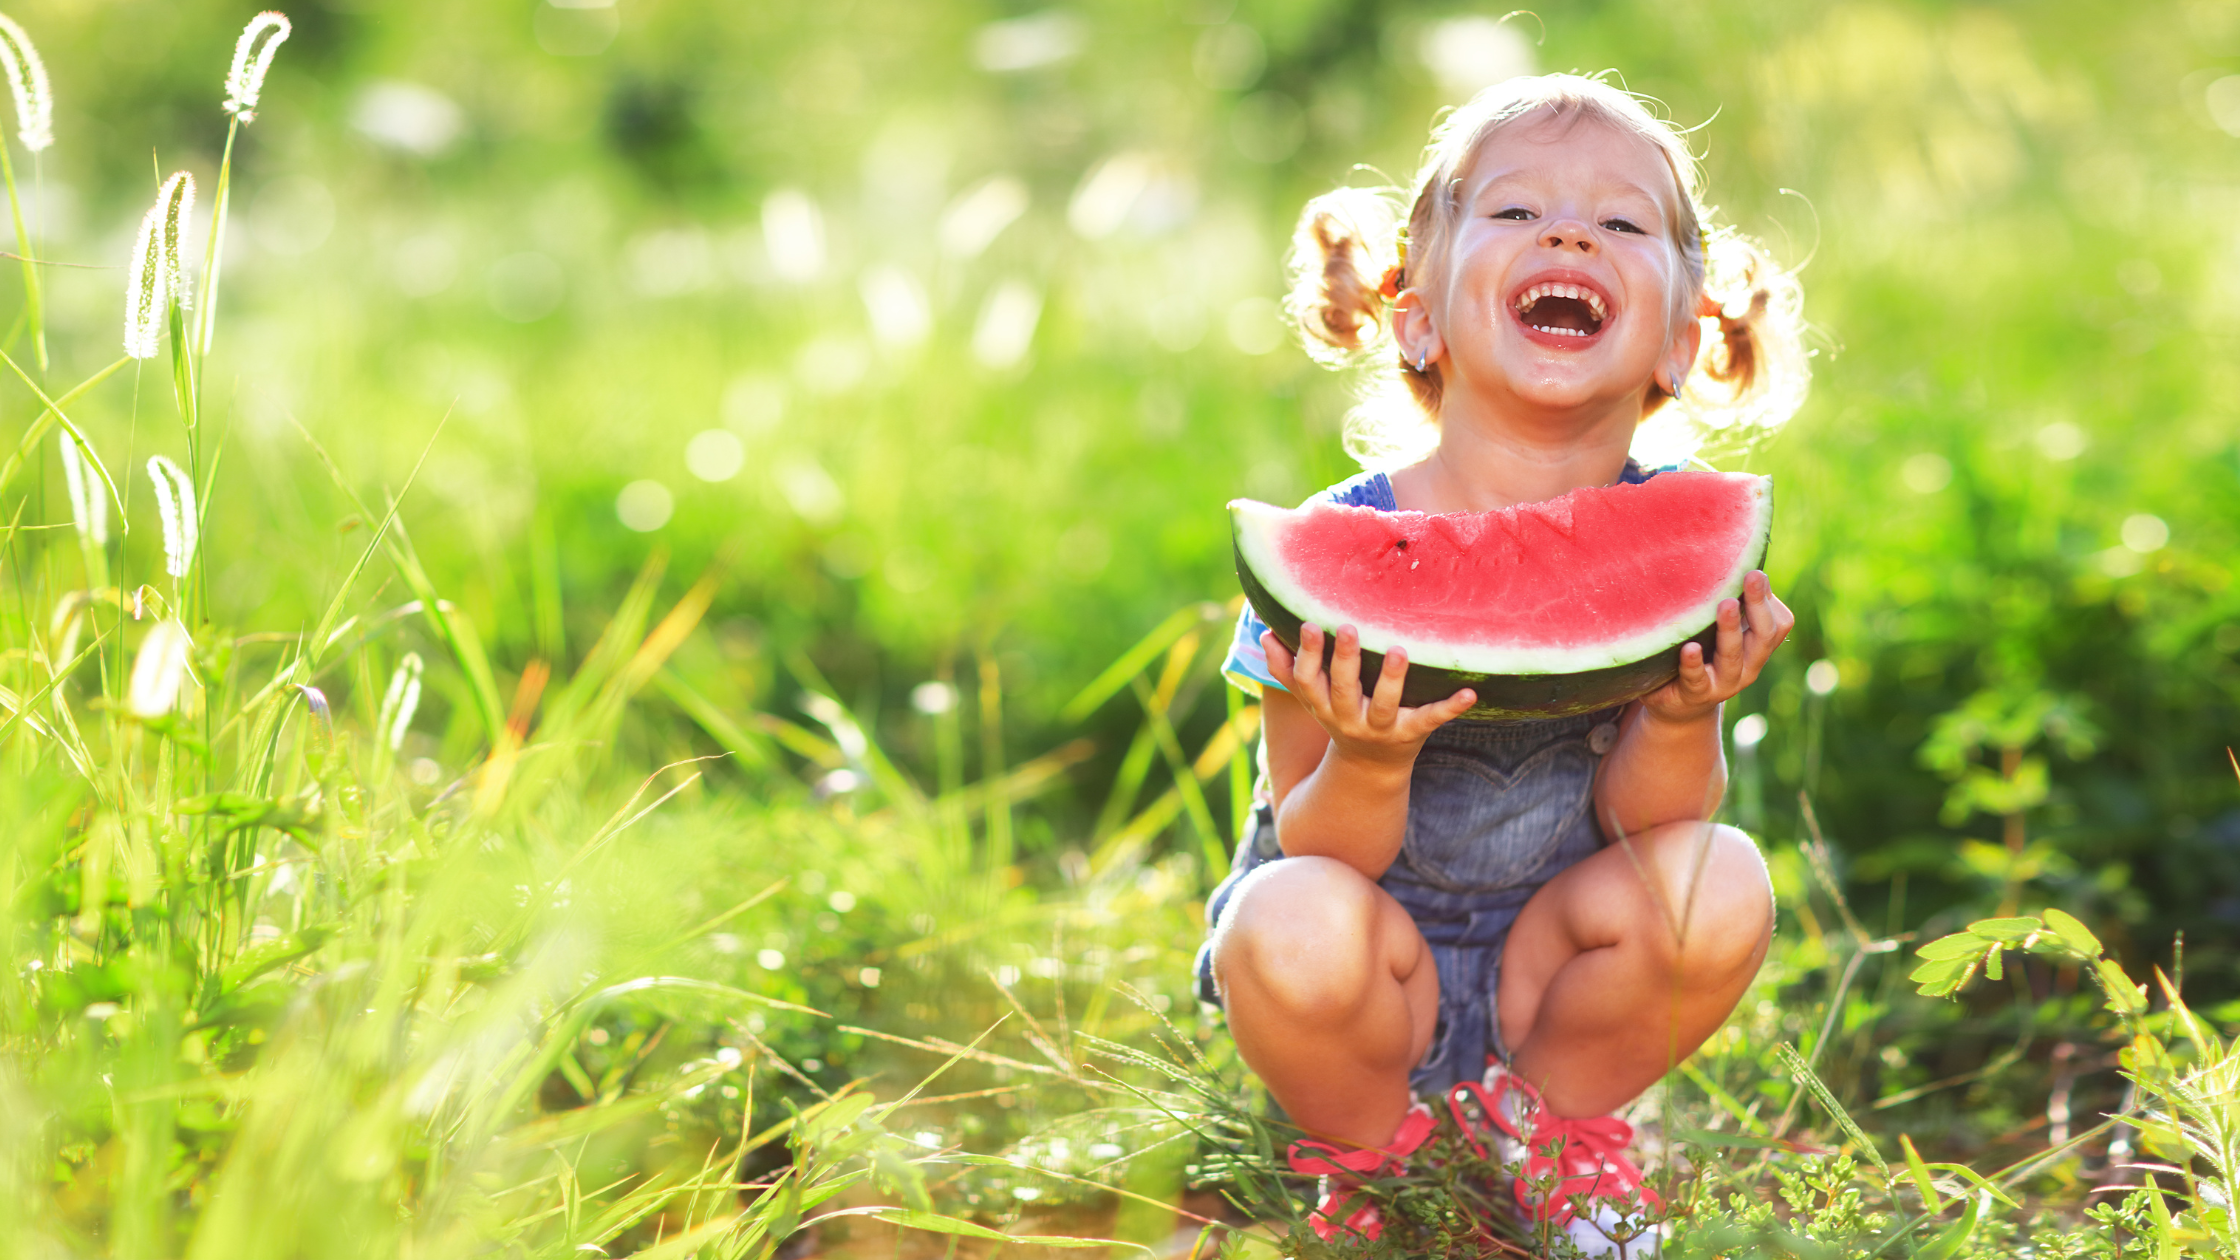 Child smiling with Watermelon